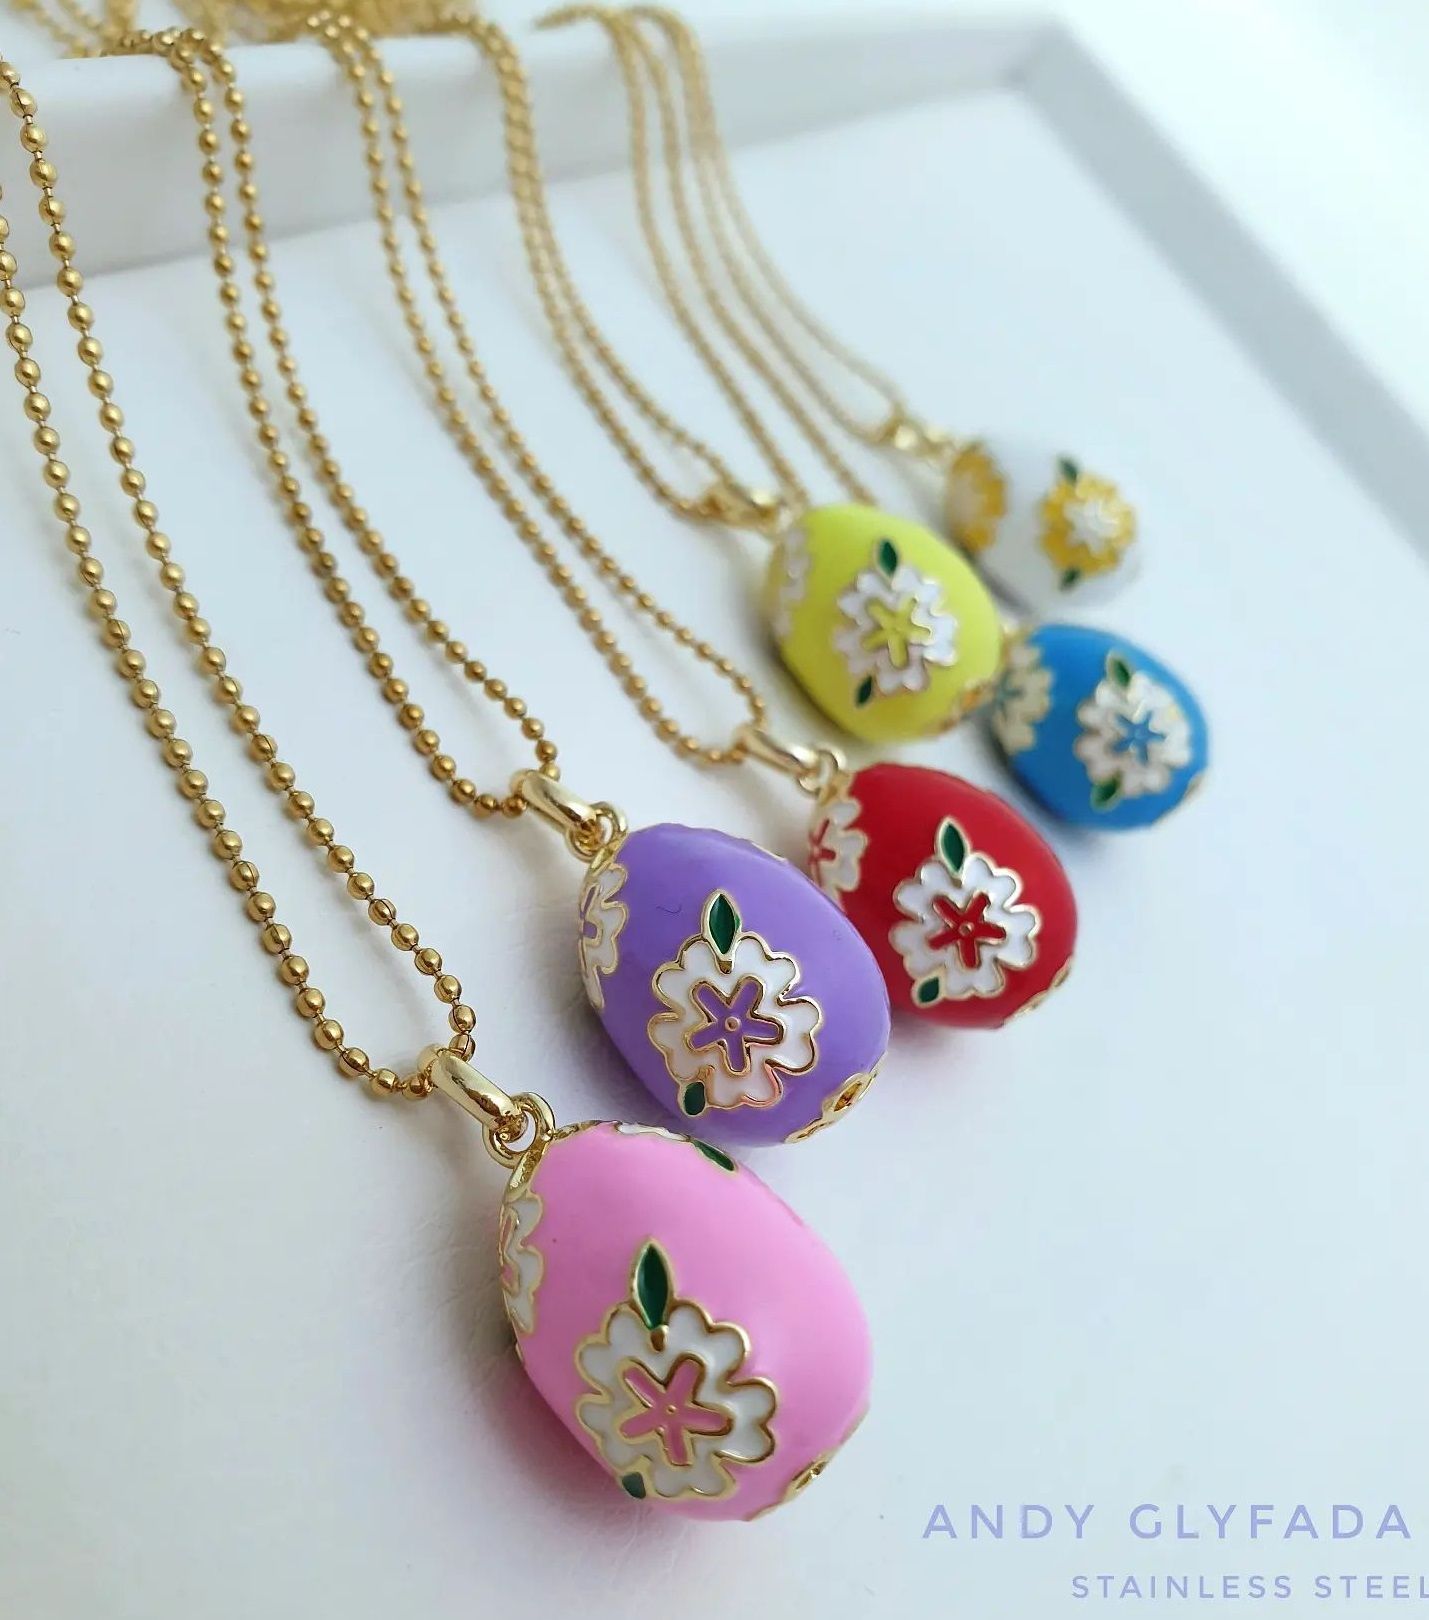 Enamel Egg Necklace with Stainless Steel Chain